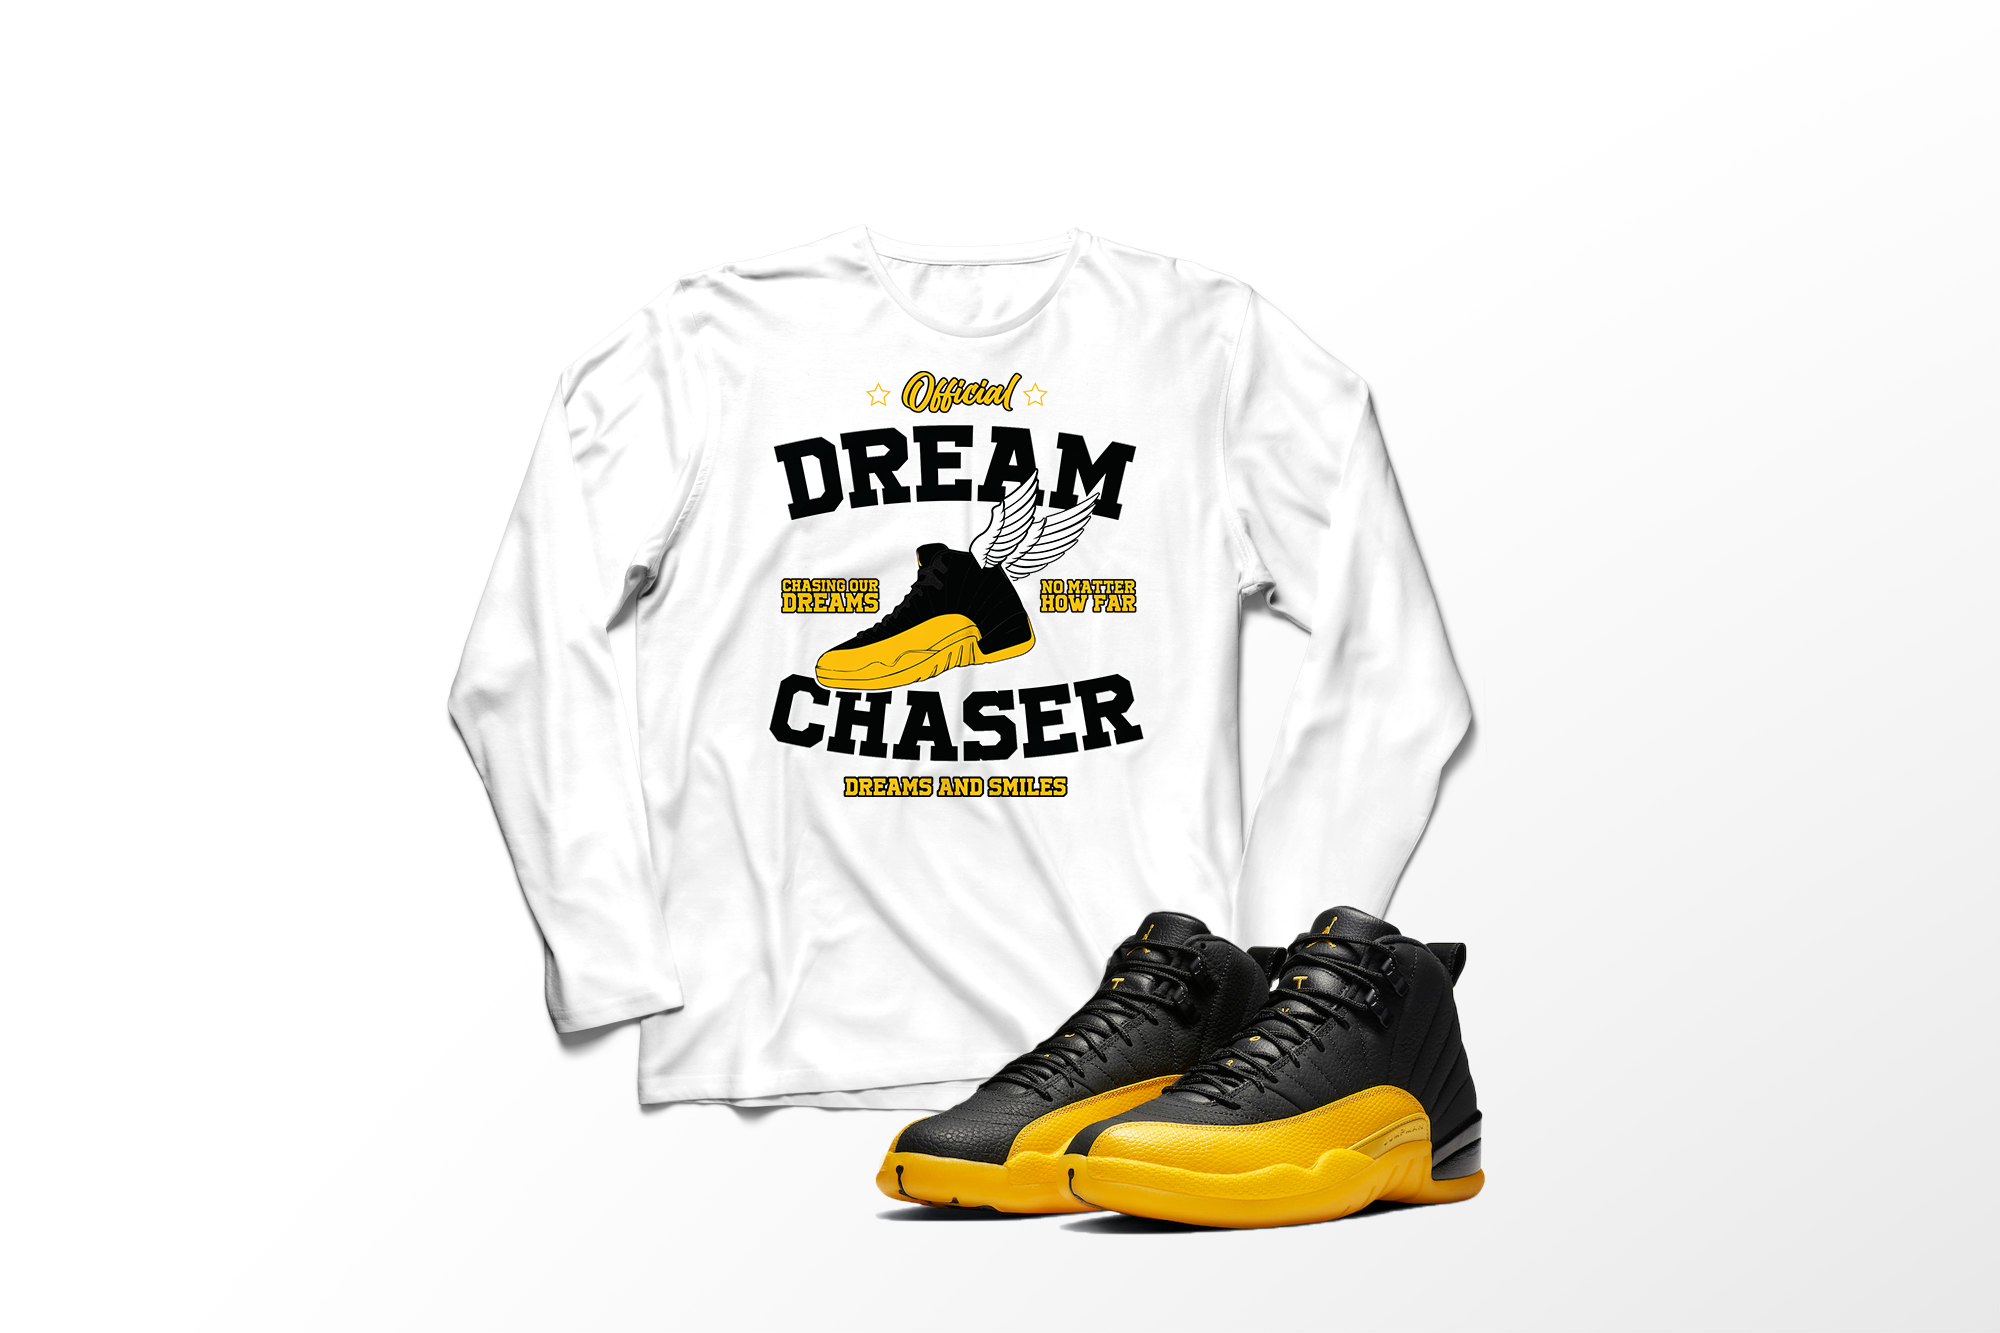 'Official Dream Chaser' in University Gold CW Men's Comfort Long Sleeve